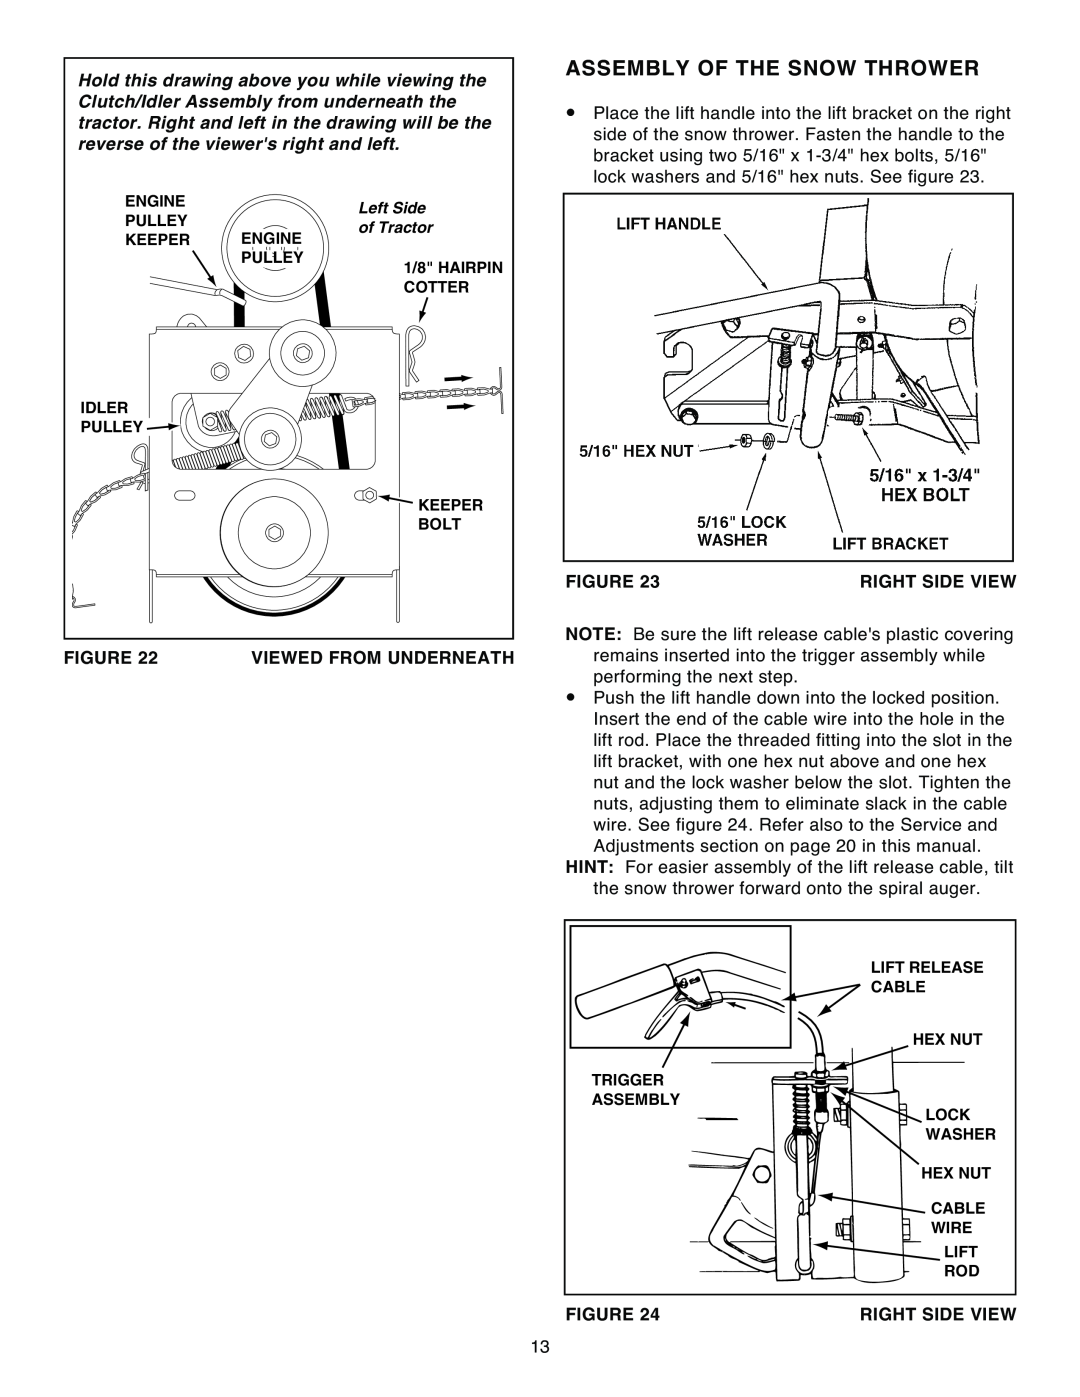 Sears 486.248392 owner manual Assembly Of The Snow Thrower, Engine, Pulley, Viewed From Underneath, Right Side View 